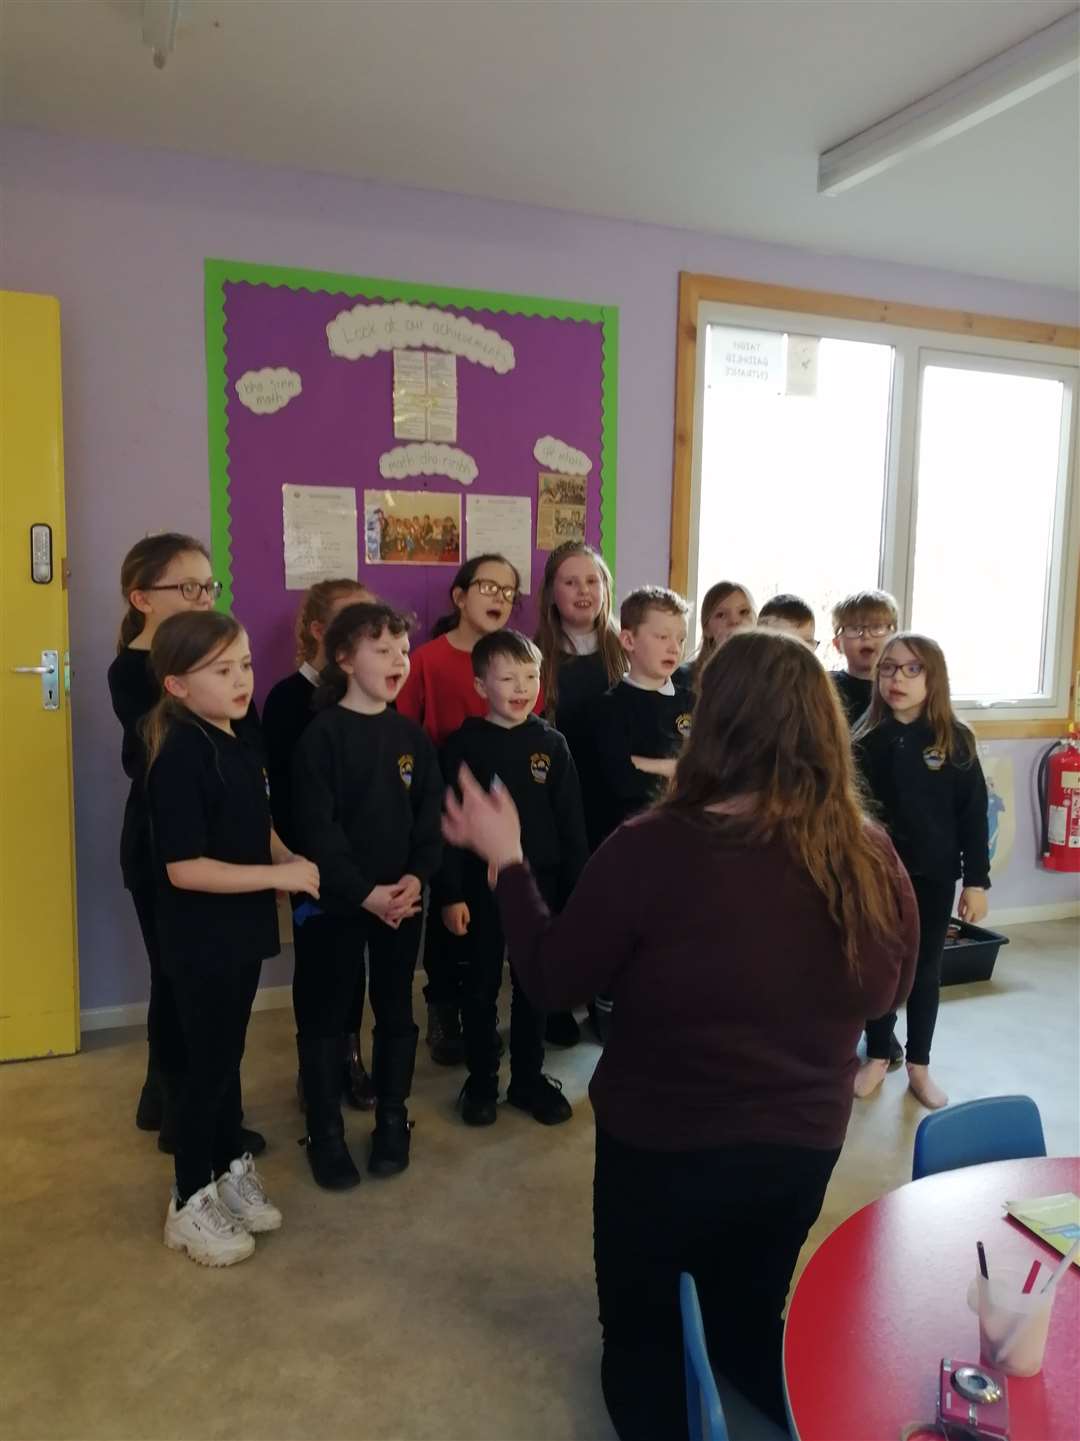 Mount Pleasant’s Gaelic choir, conducted by Gaelic class teacher Lynsey Munro, sang several songs at the open day.